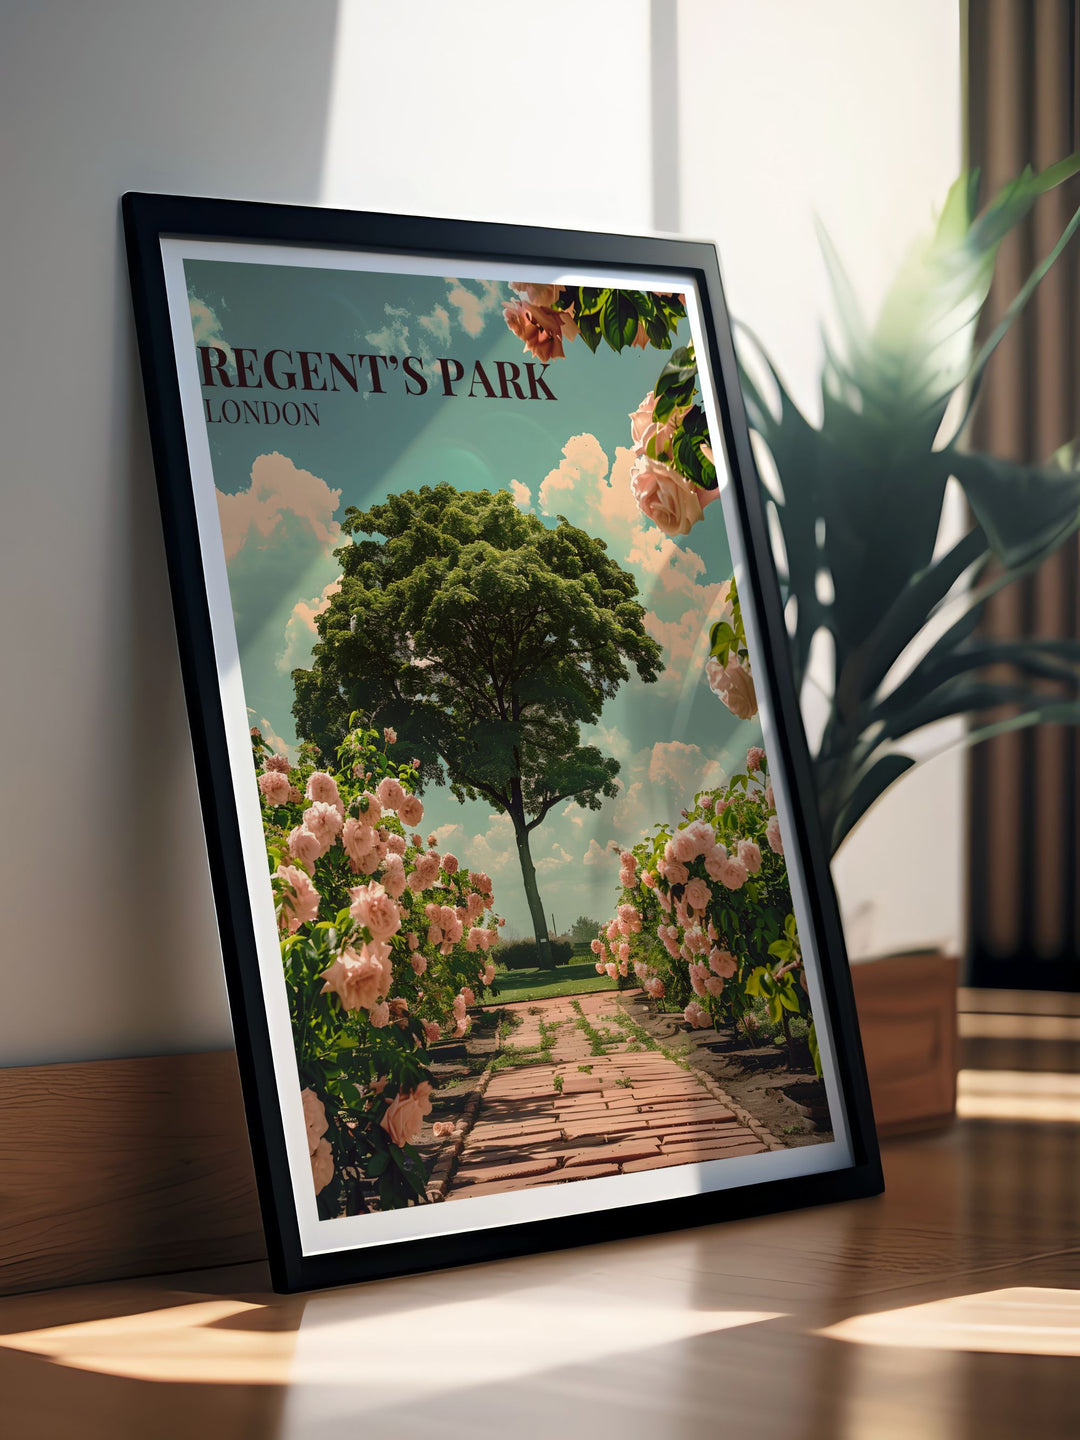 Queen Mary Garden Posters capturing the lush rose gardens and tranquil setting of this beloved location in Regents Park.